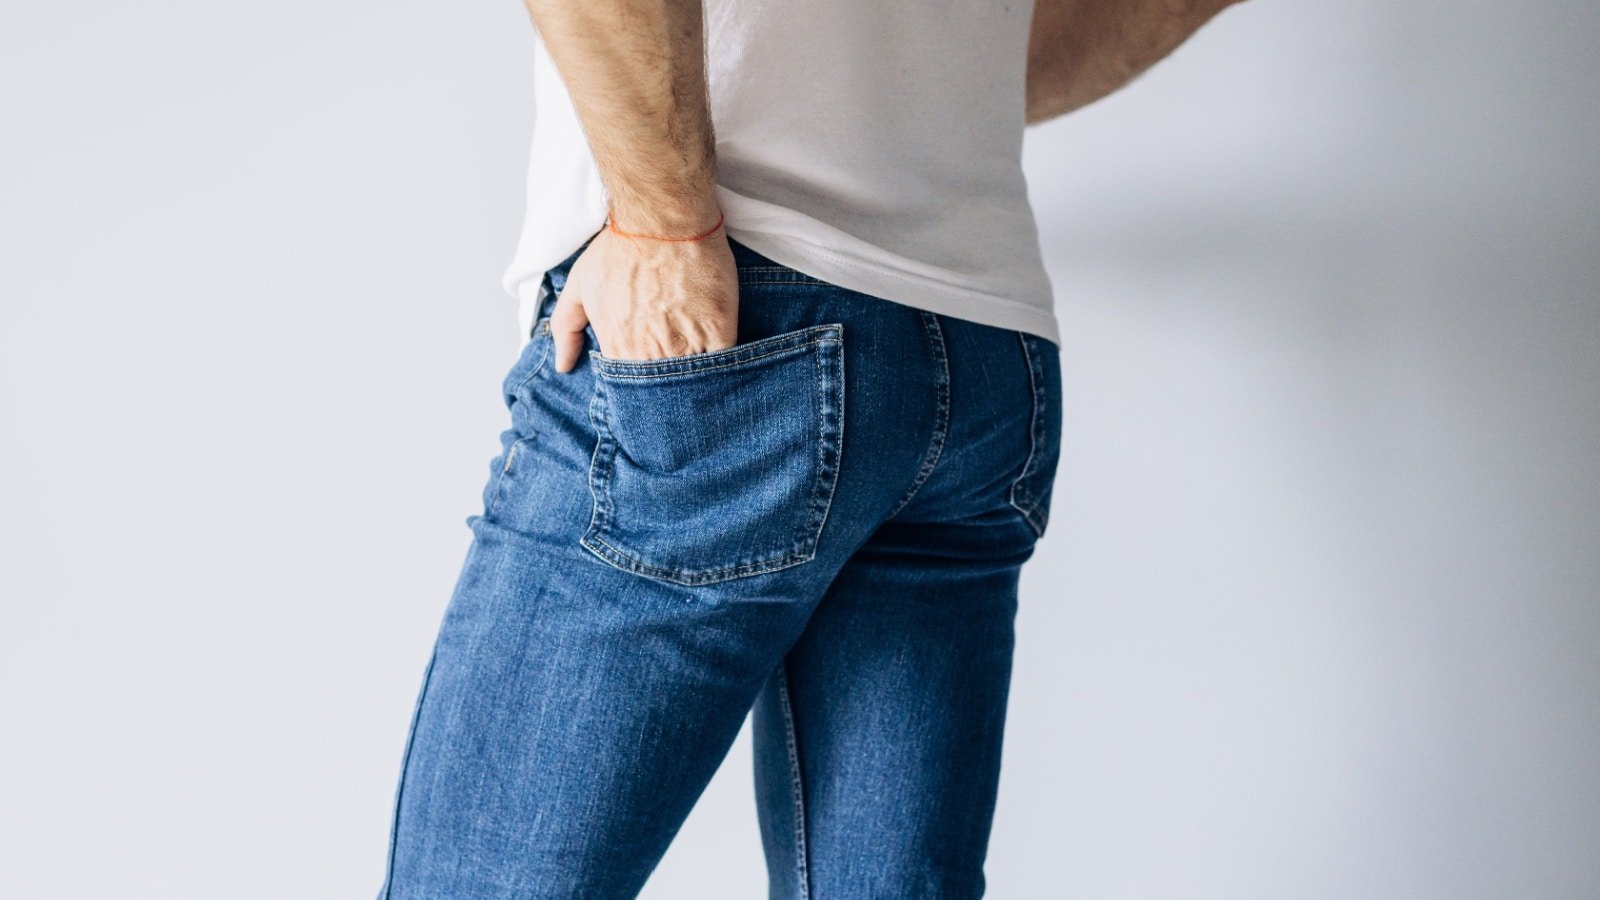 <p>In slang, “keister” refers to the rump or buttocks. Its origin is uncertain, but it may come from the idea of something being kept in one’s back pocket or carried on one’s person, similar to the way contraband might be hidden in someone’s keister.</p>